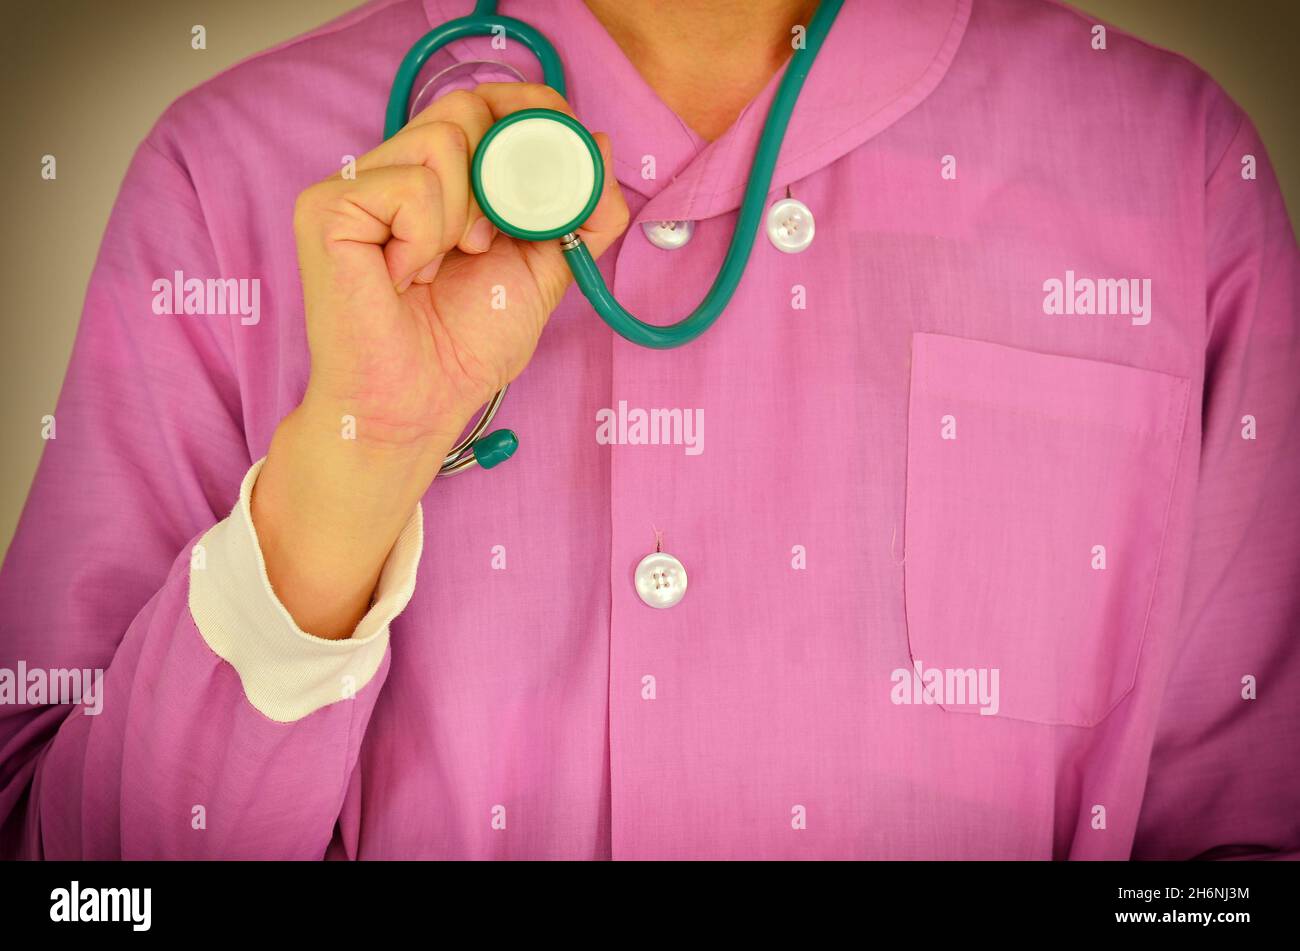 Physical examination your health now Stock Photo